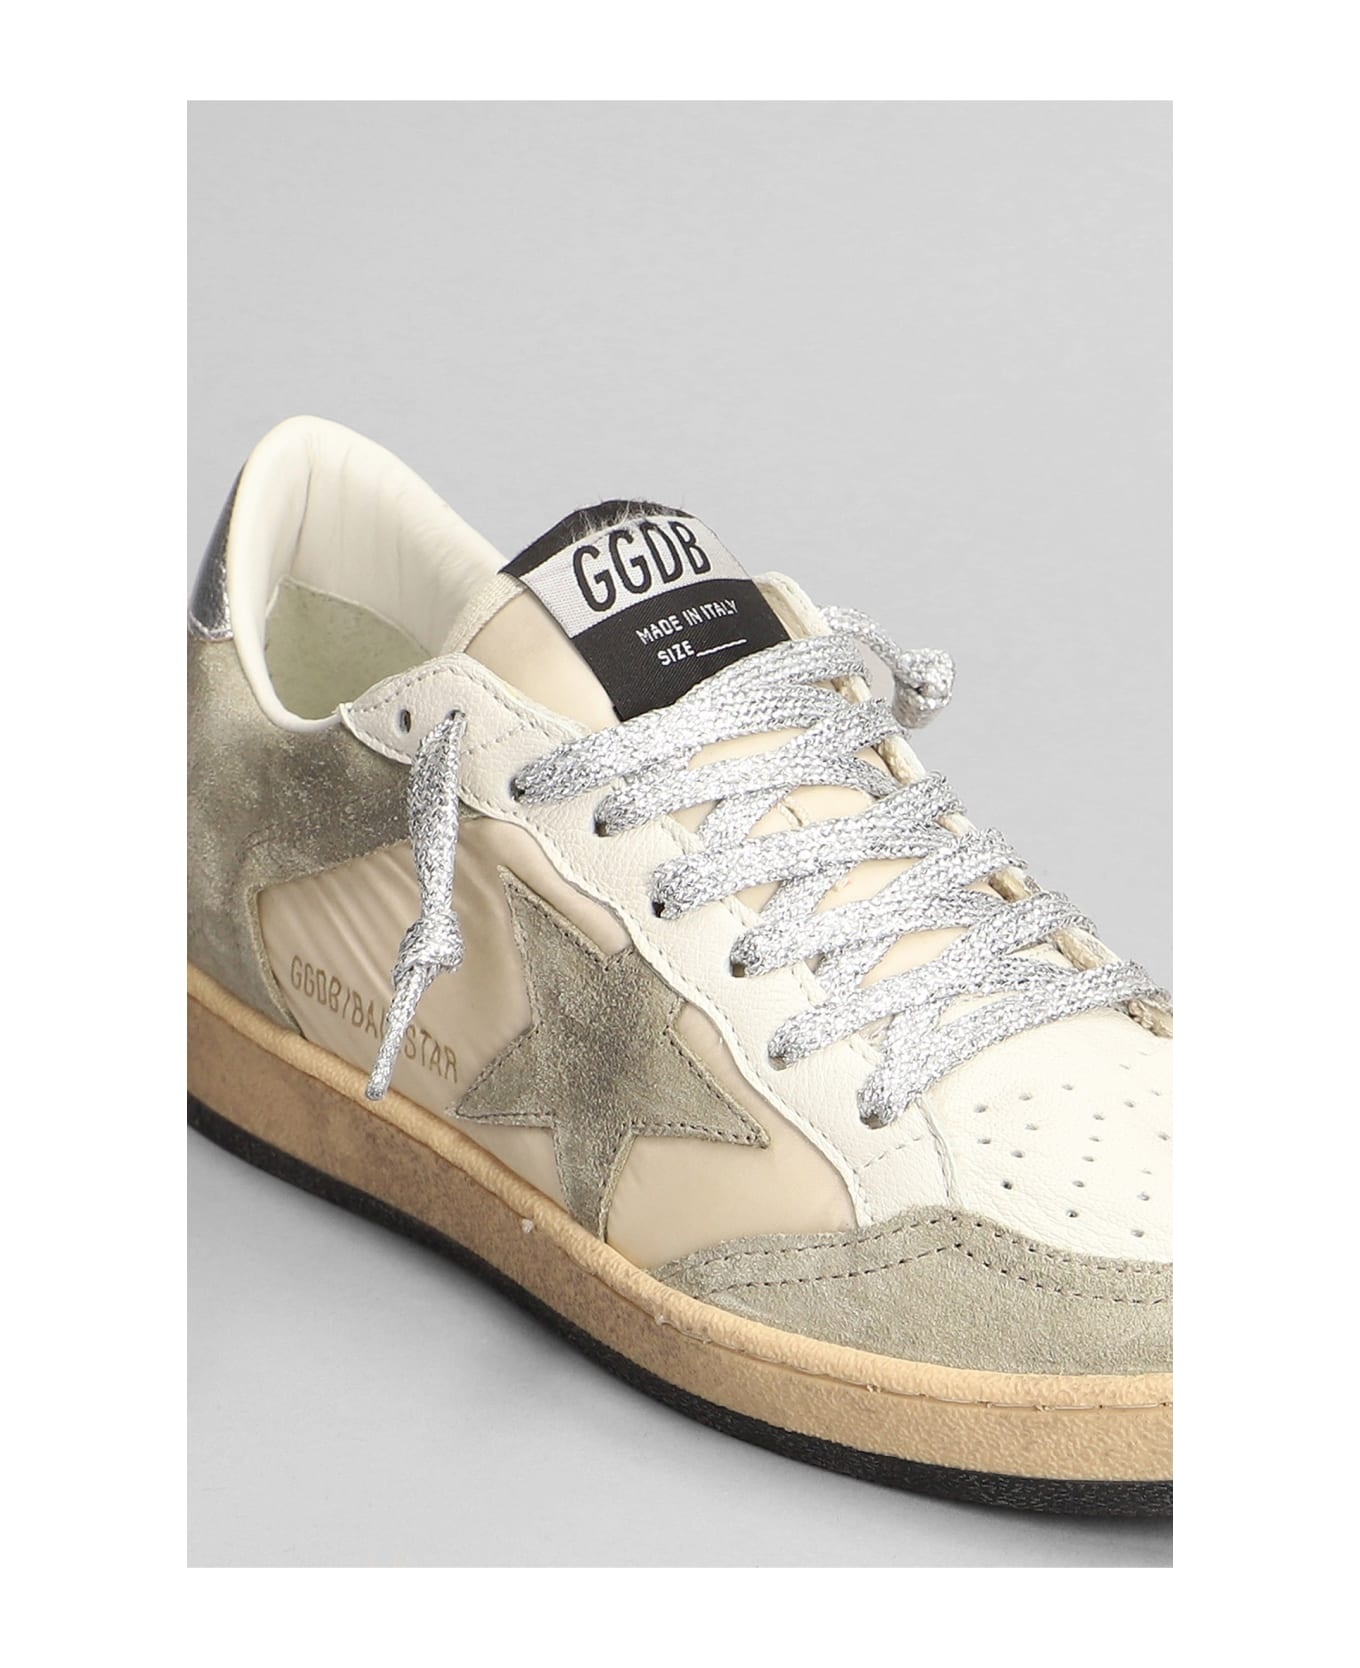 Ball Star Sneakers In Beige Leather And Fabric - 5